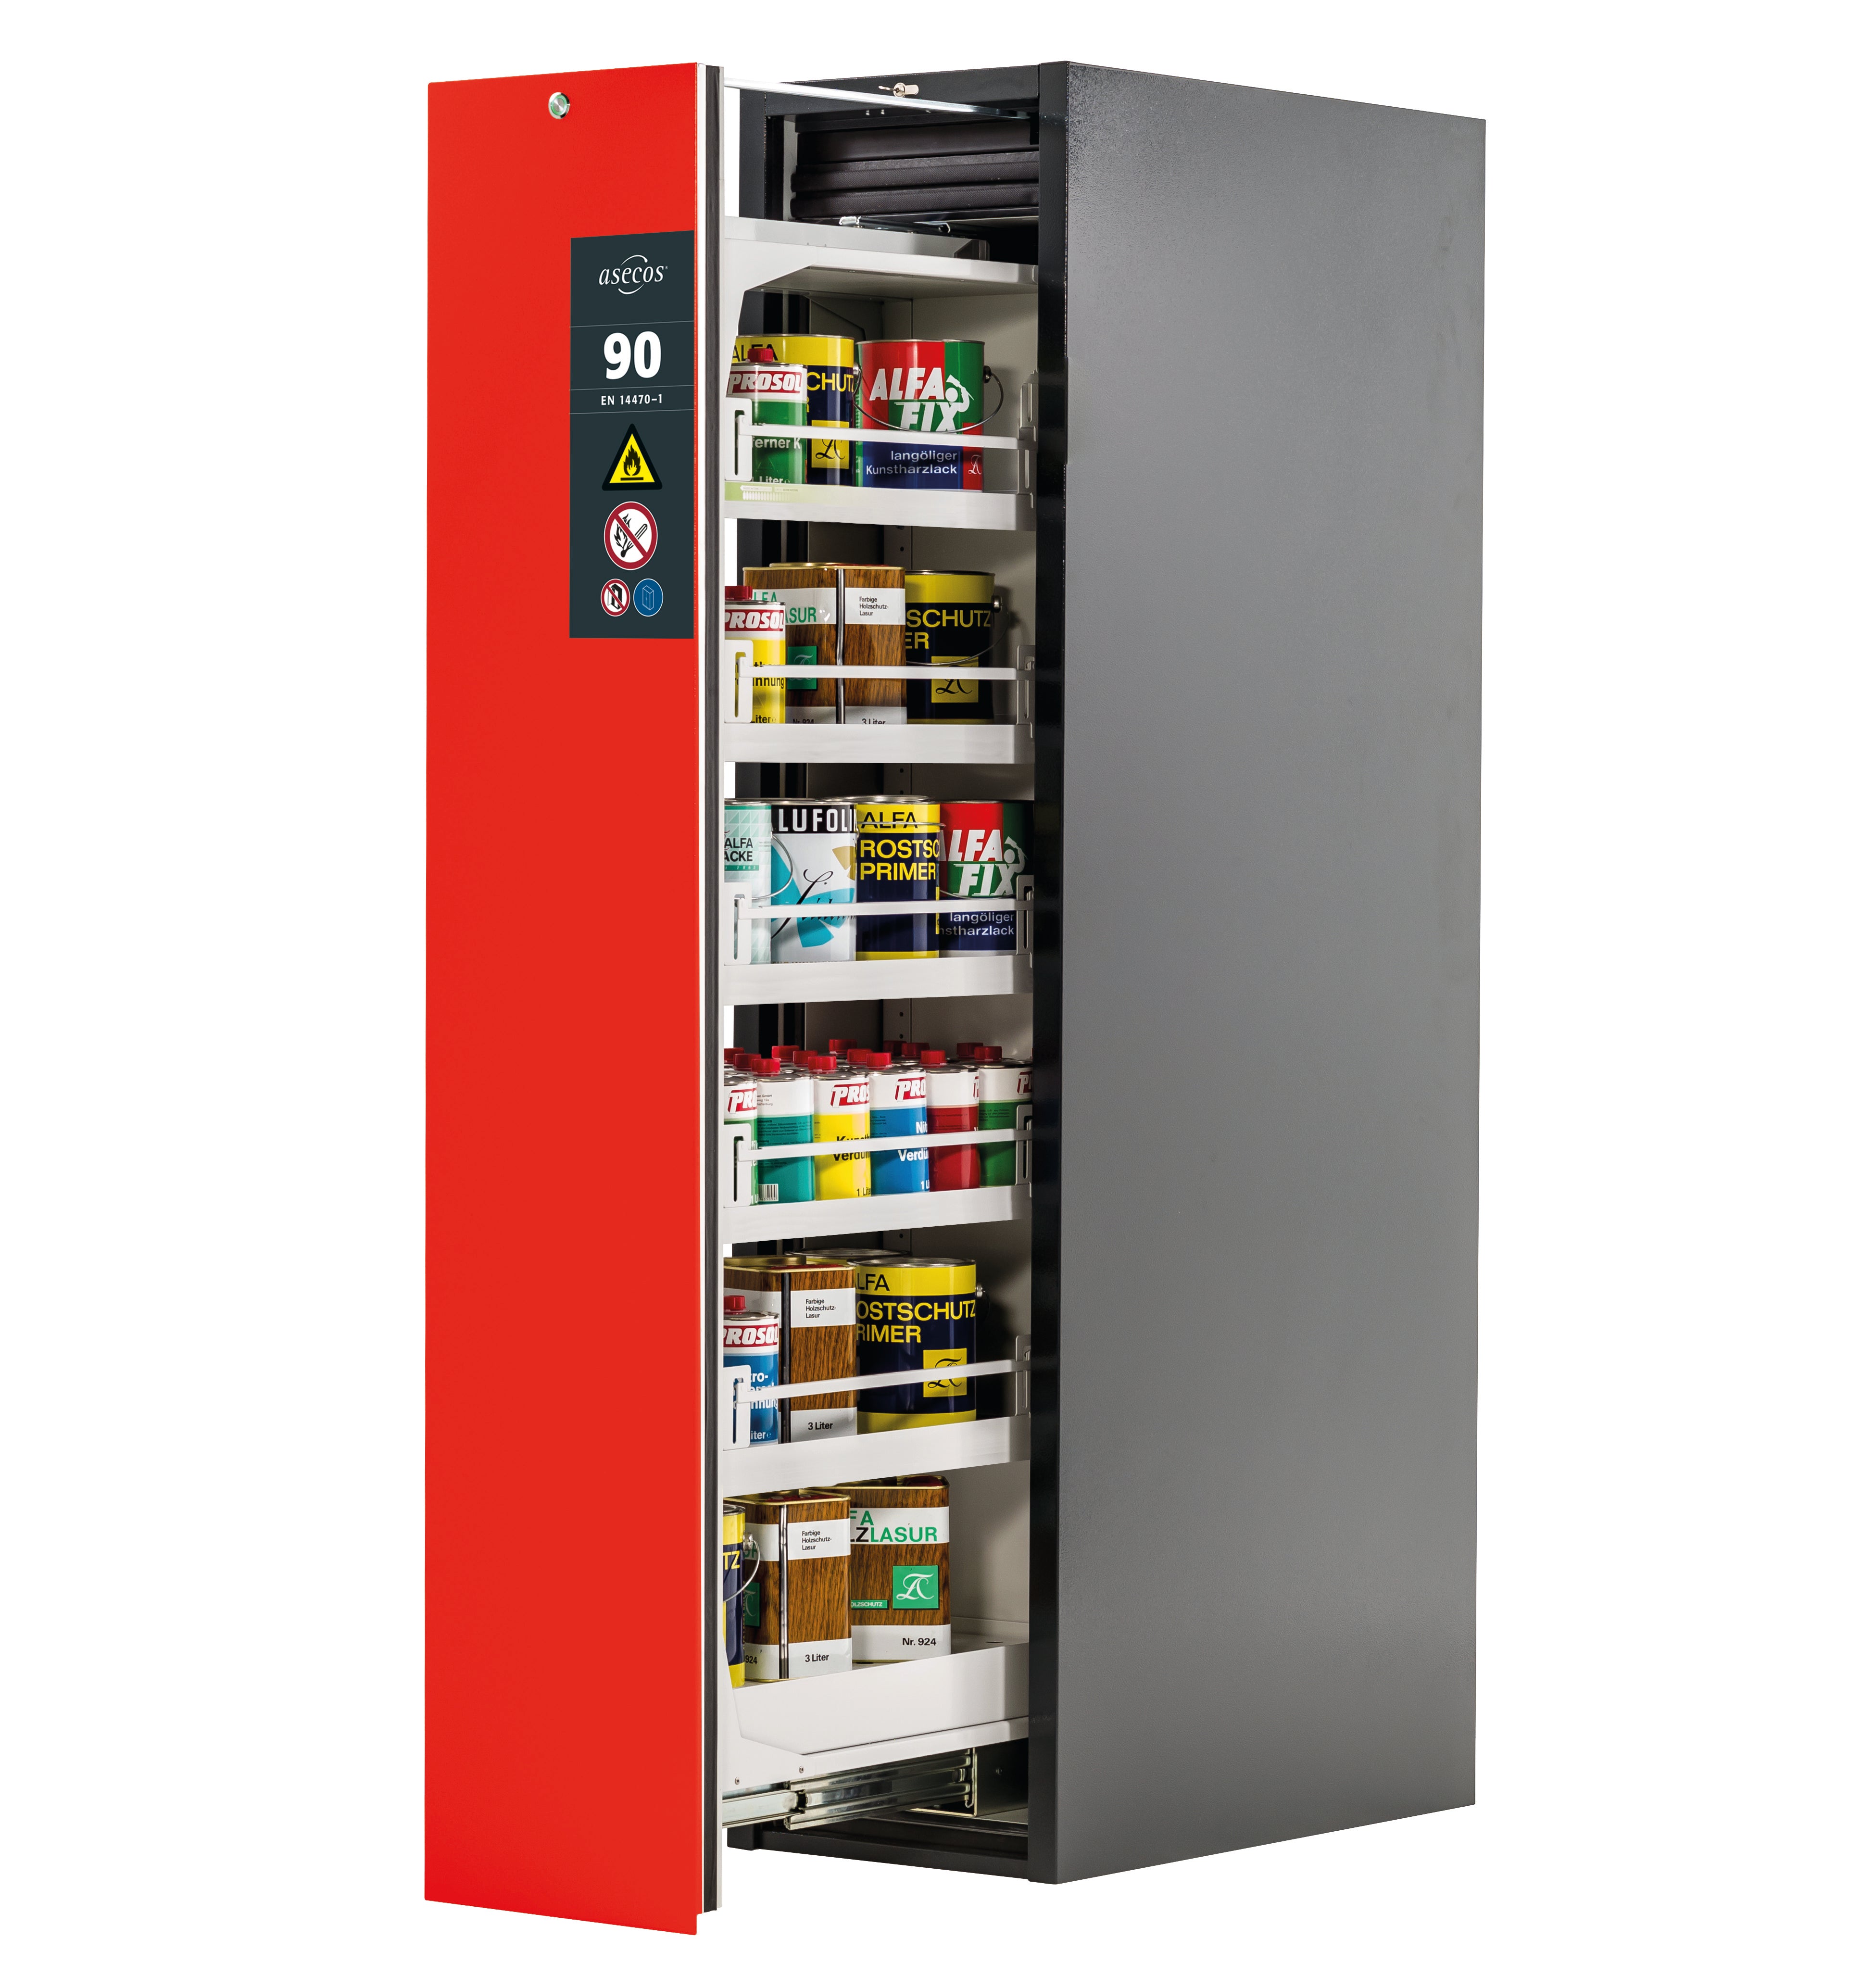 Type 90 safety cabinet V-MOVE-90 model V90.196.045.VDAC:0013 in traffic red RAL 3020 with 5x standard tray base (sheet steel)